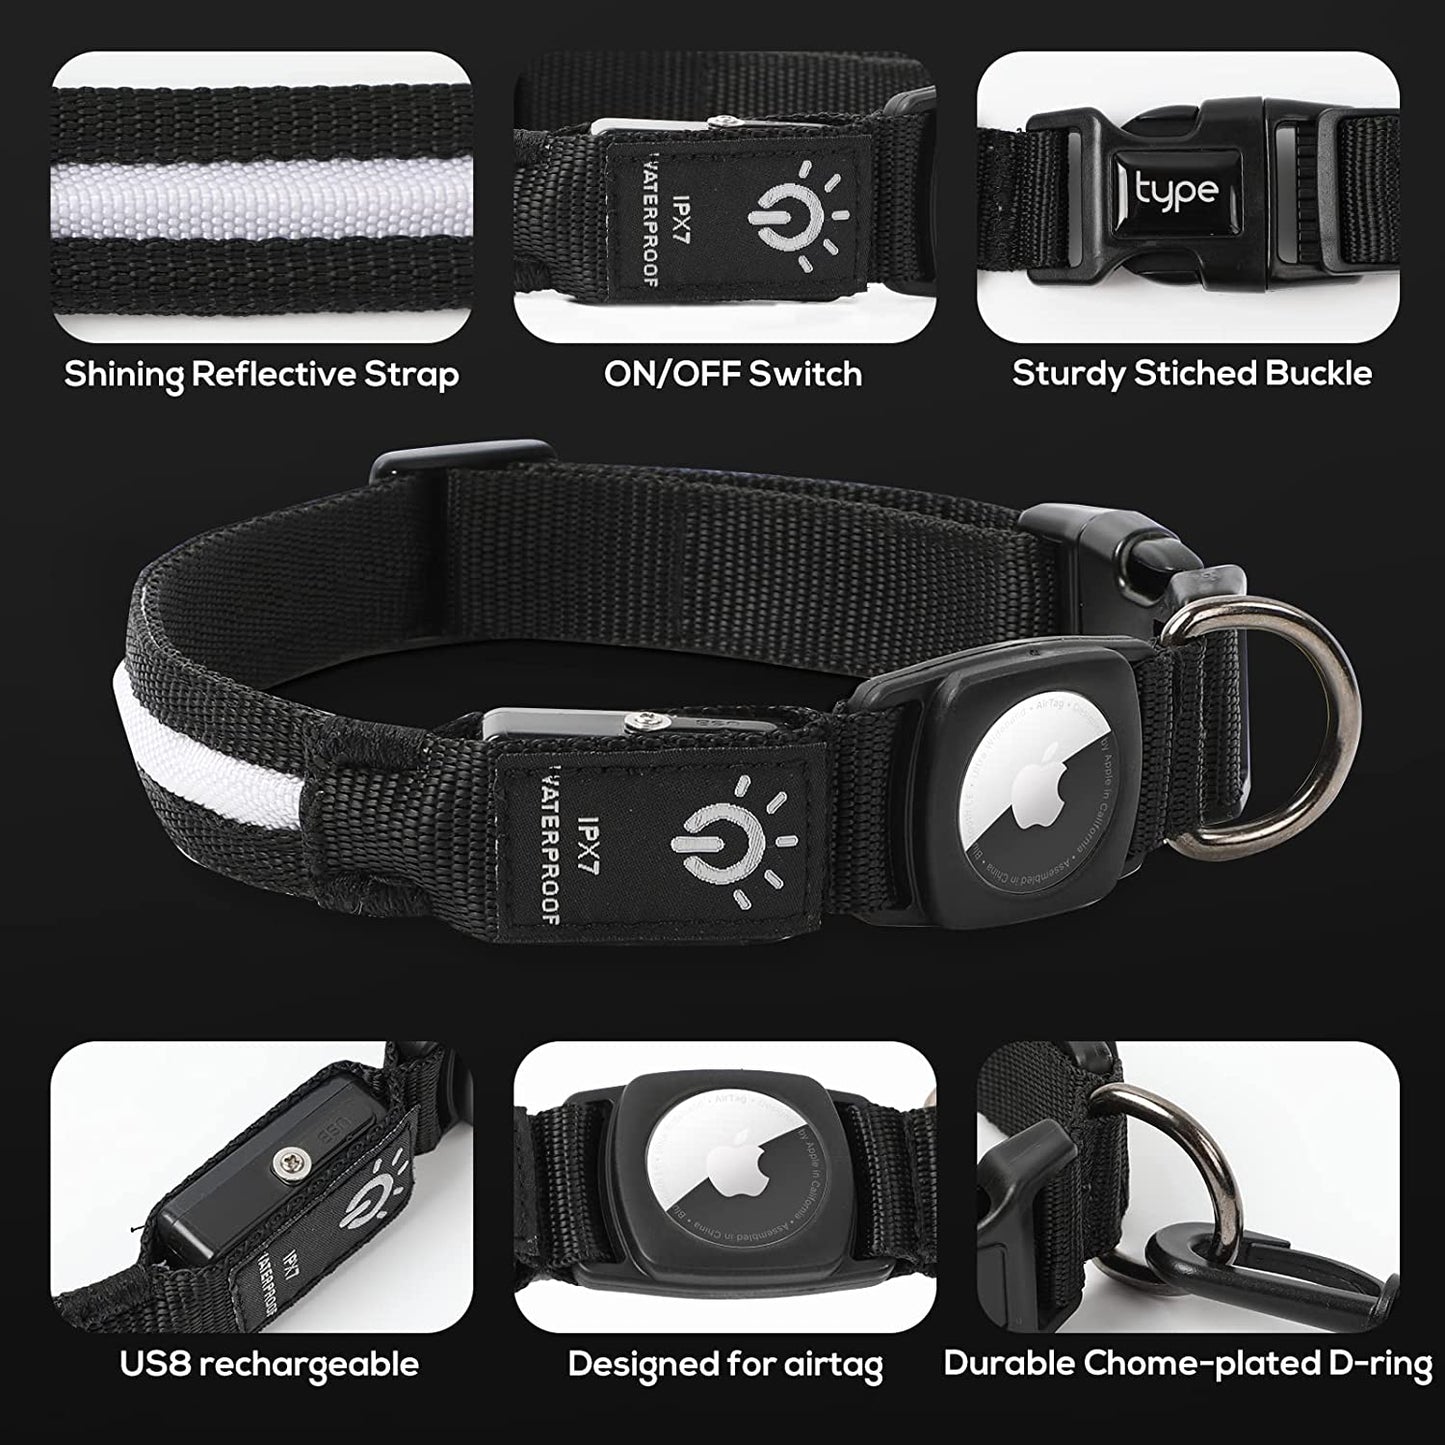 Waterproof LED Dog Collar for Apple AirTag Tracker [FREE SHIPPING]